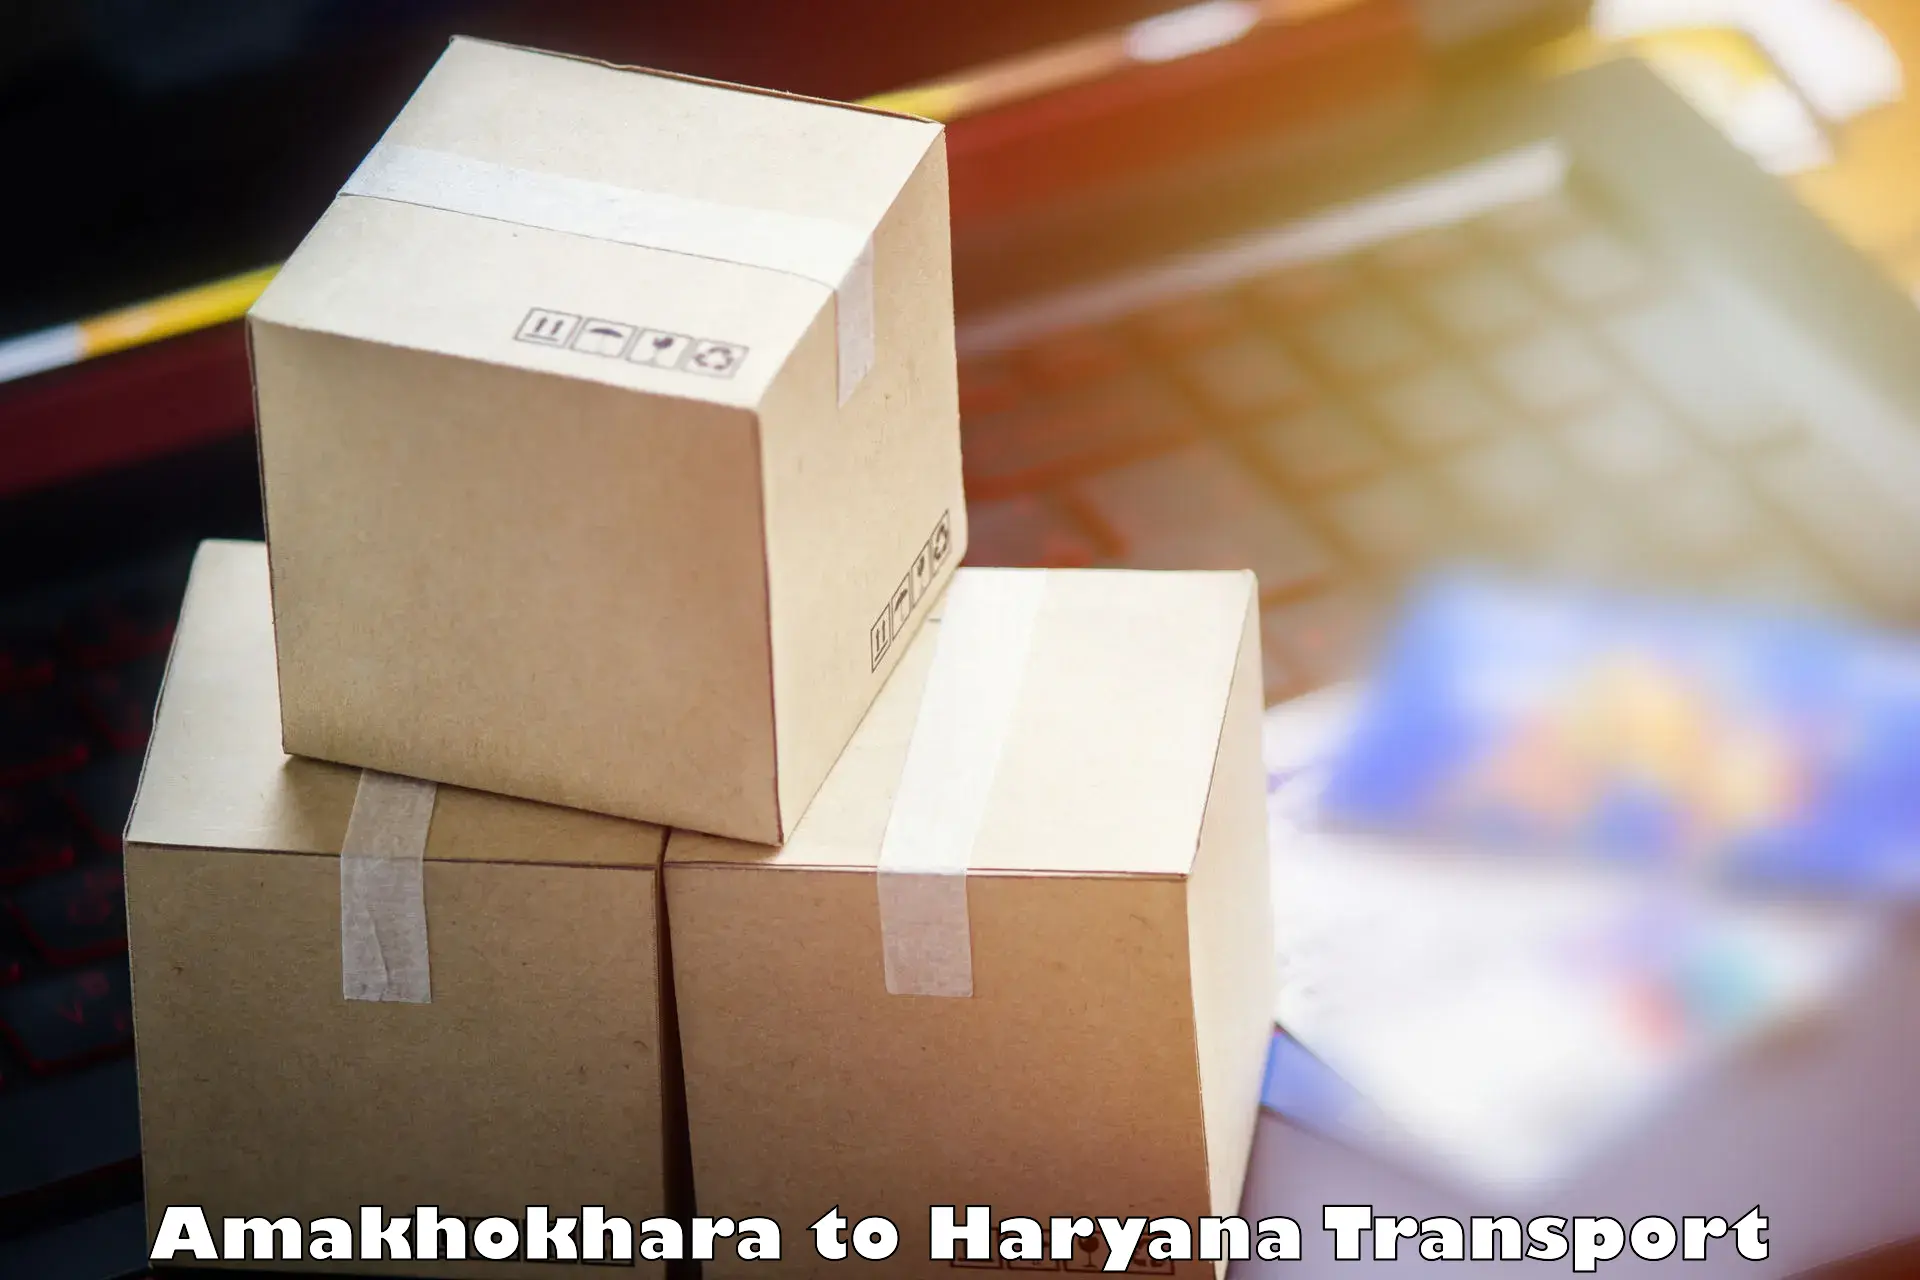 Furniture transport service in Amakhokhara to Palwal